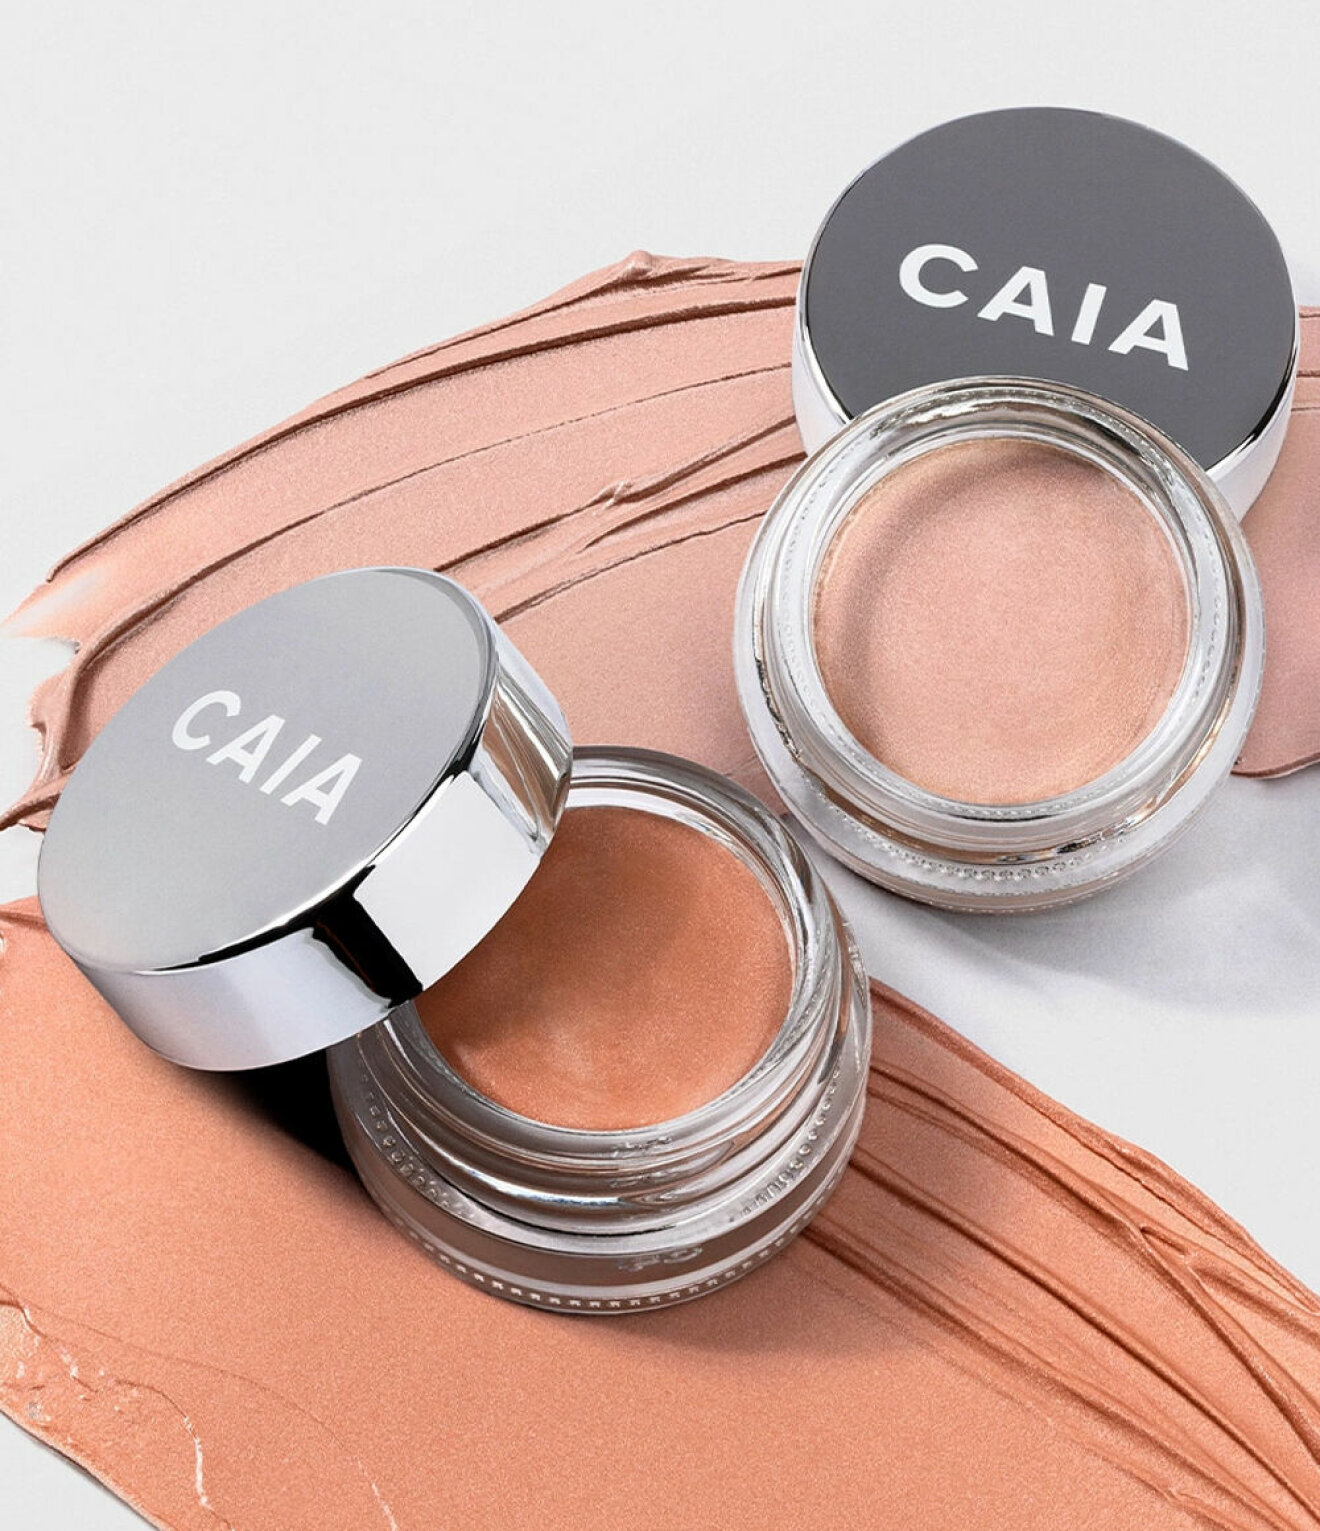 caia concealer recension test wake me up cream expert